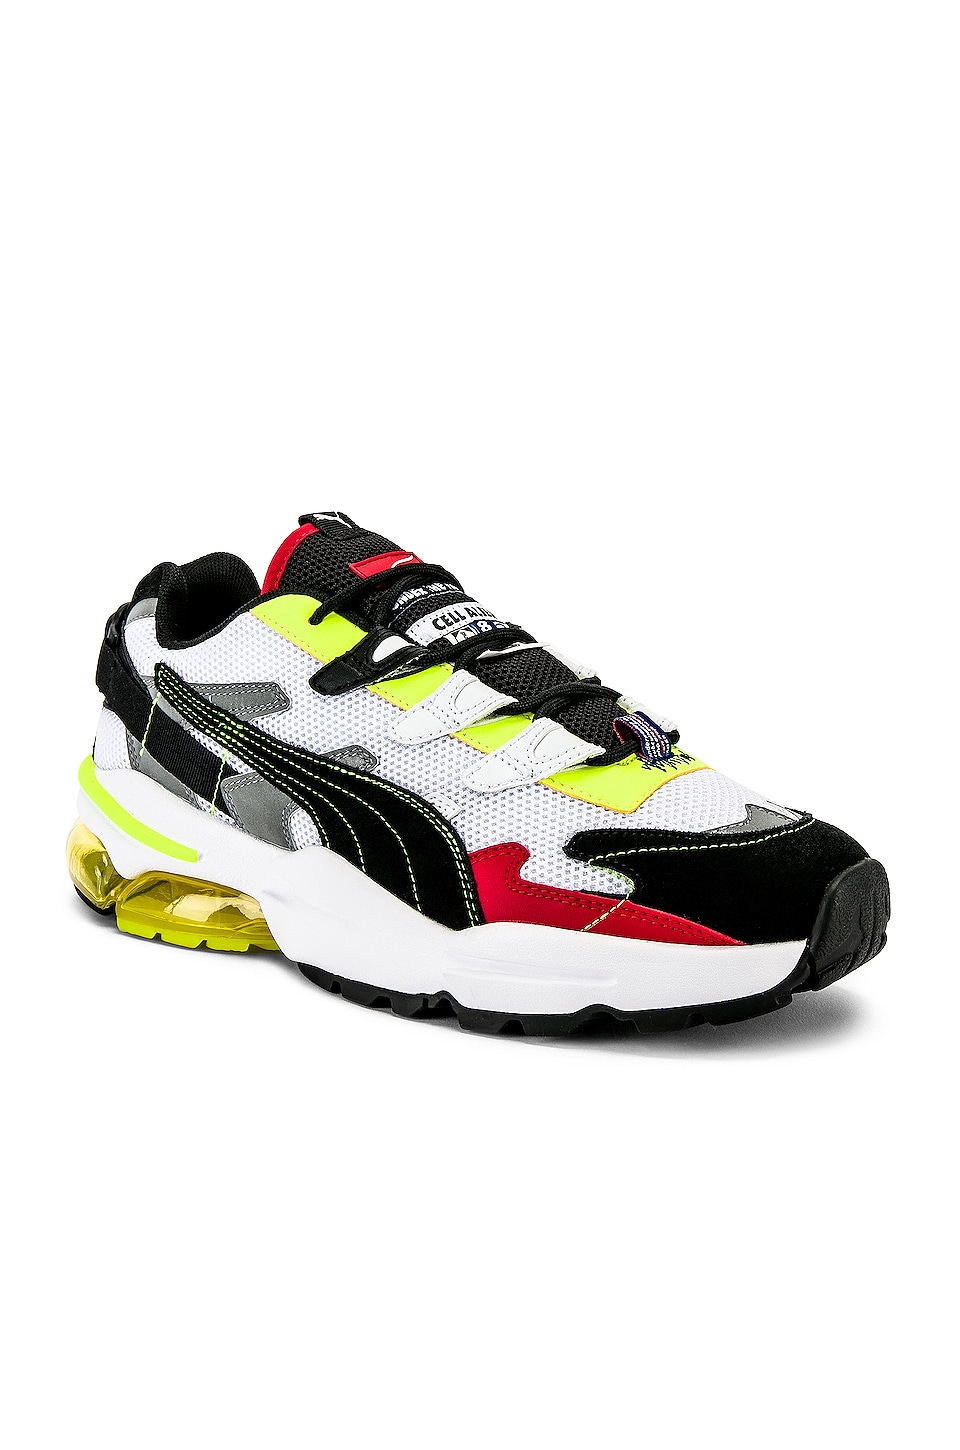 Puma Select x Ader Error Cell Alien in 